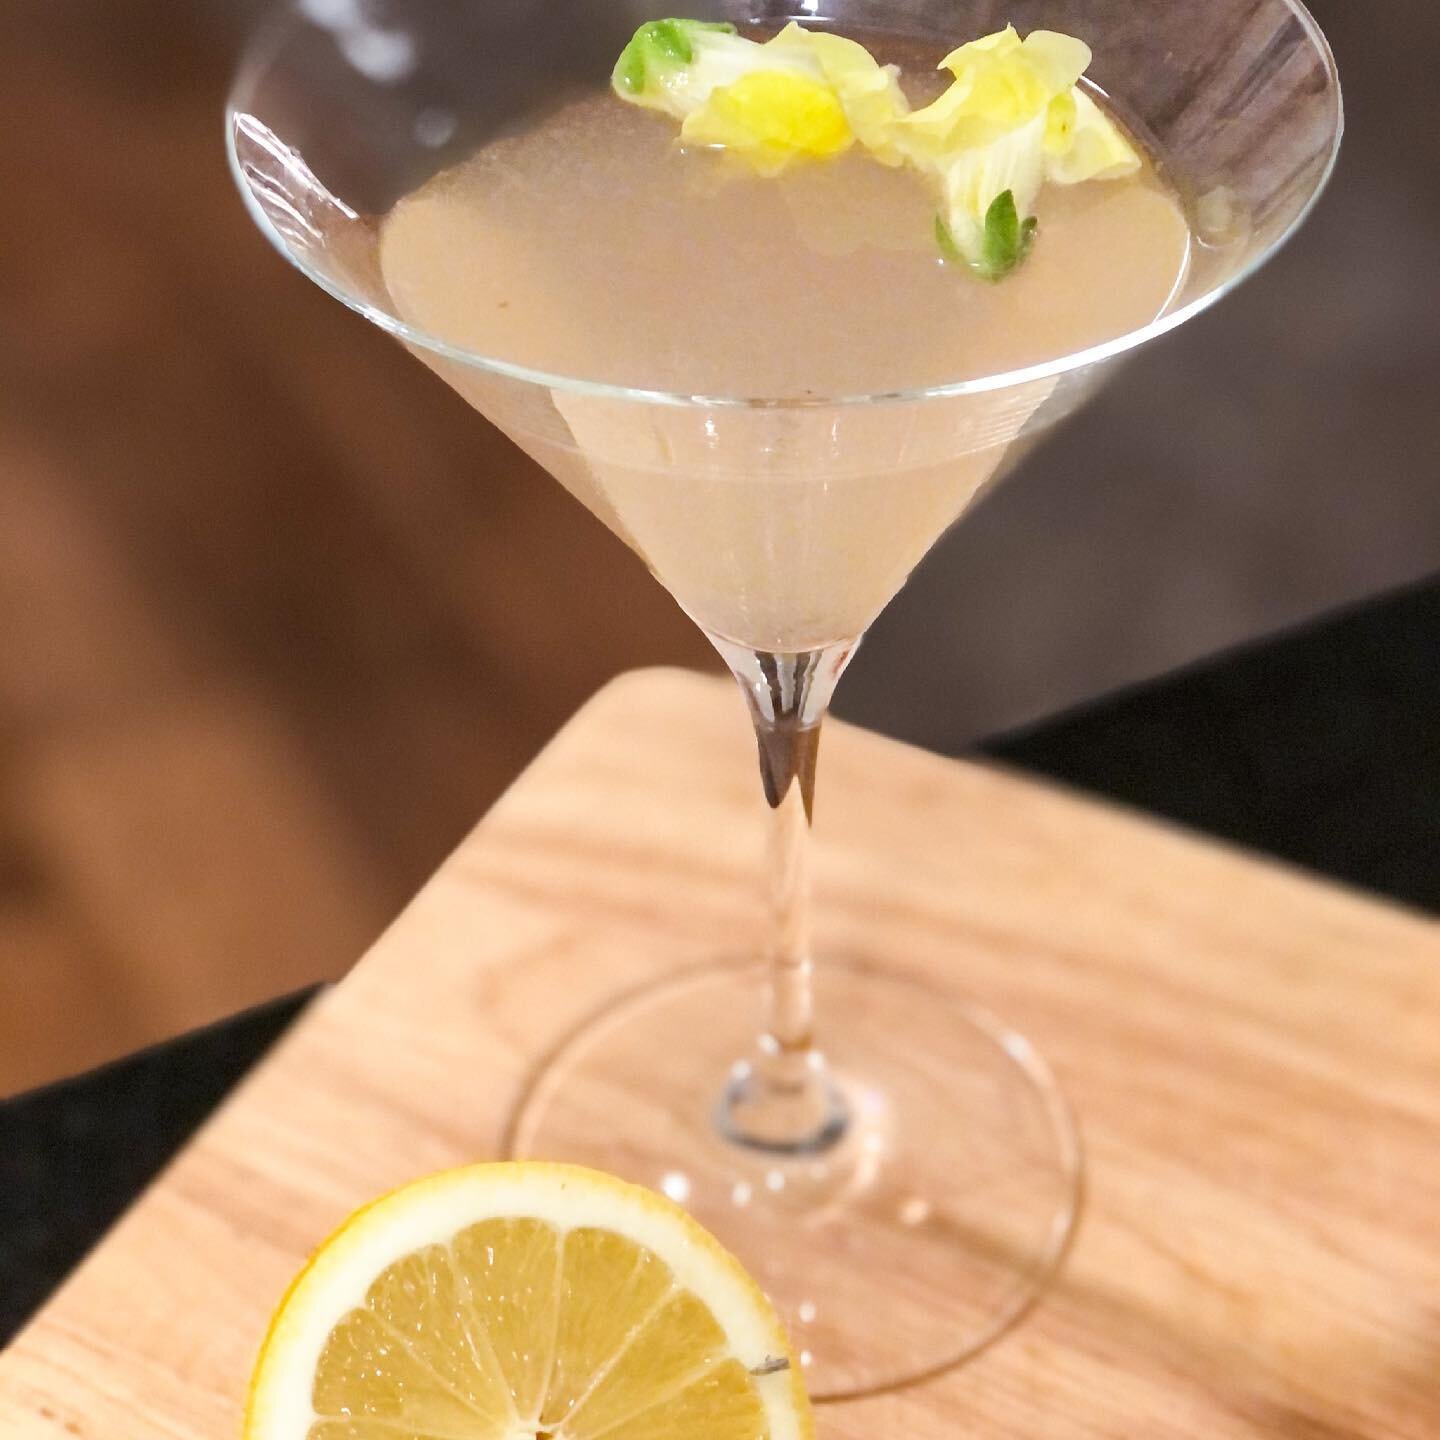 Happy Friday! Definitely ready for the weekend and will be celebrating by having a traditional Bees Knees Cocktail! Recipe below:

Ingredients 
2 ounces gin
3/4 ounce lemon juice, freshly squeezed
1/2 ounce honey syrup

Preparation
Pour all ingredien